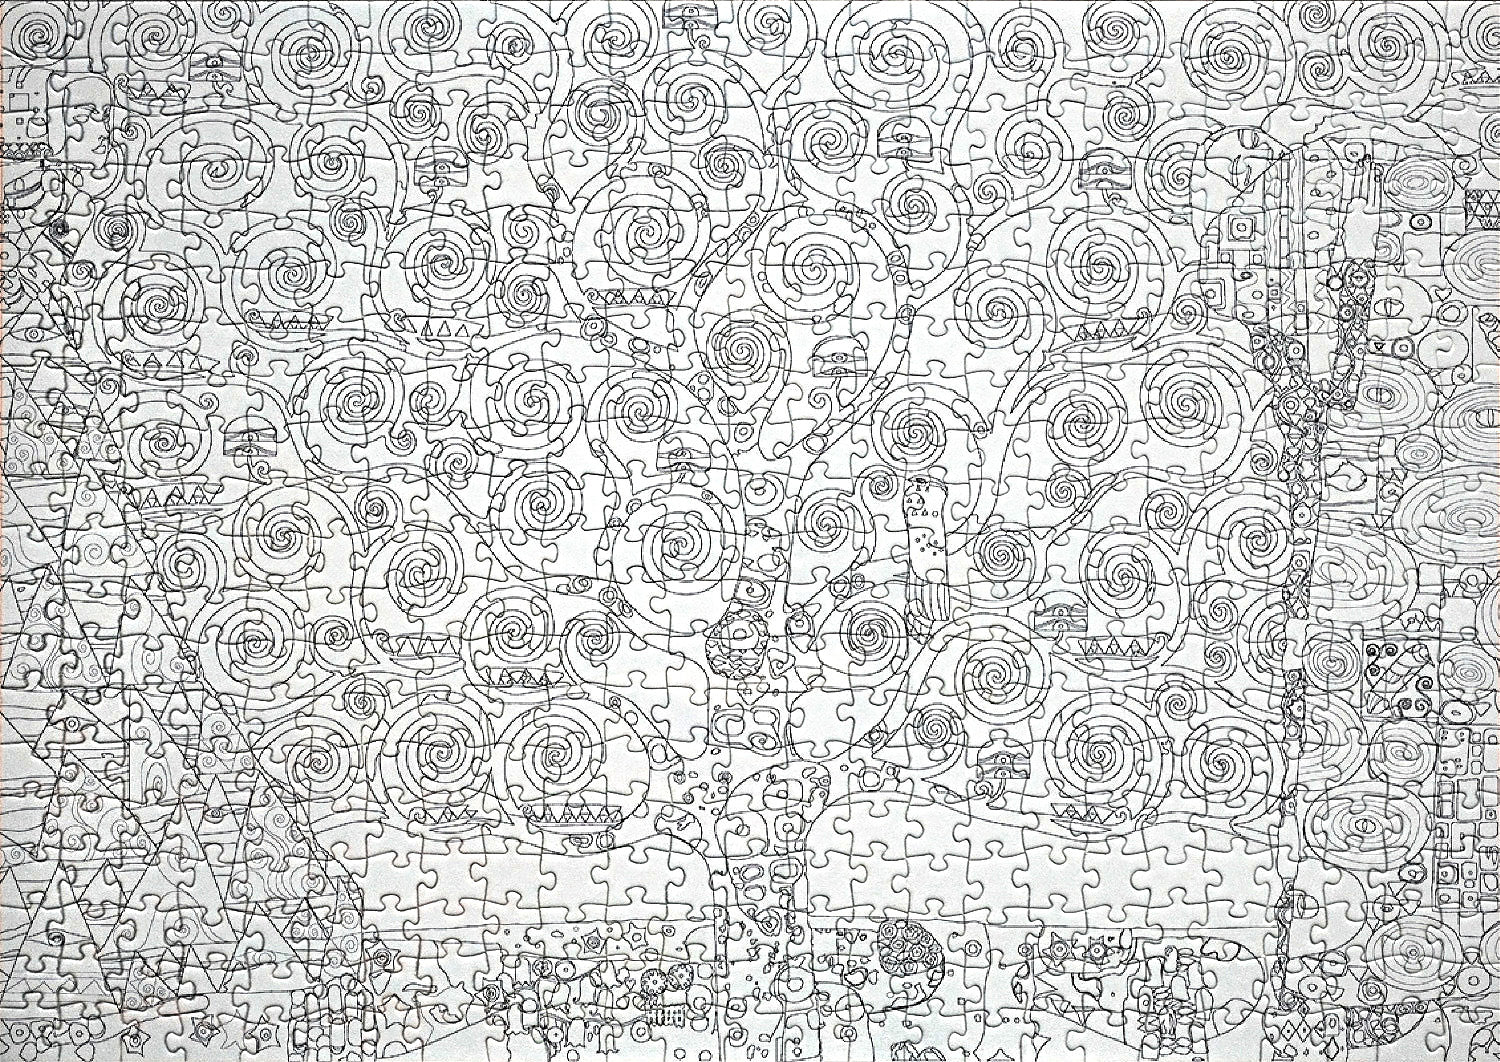 Stress-relieving adult colouring jigsaw puzzle with intricate patterns and symbolism